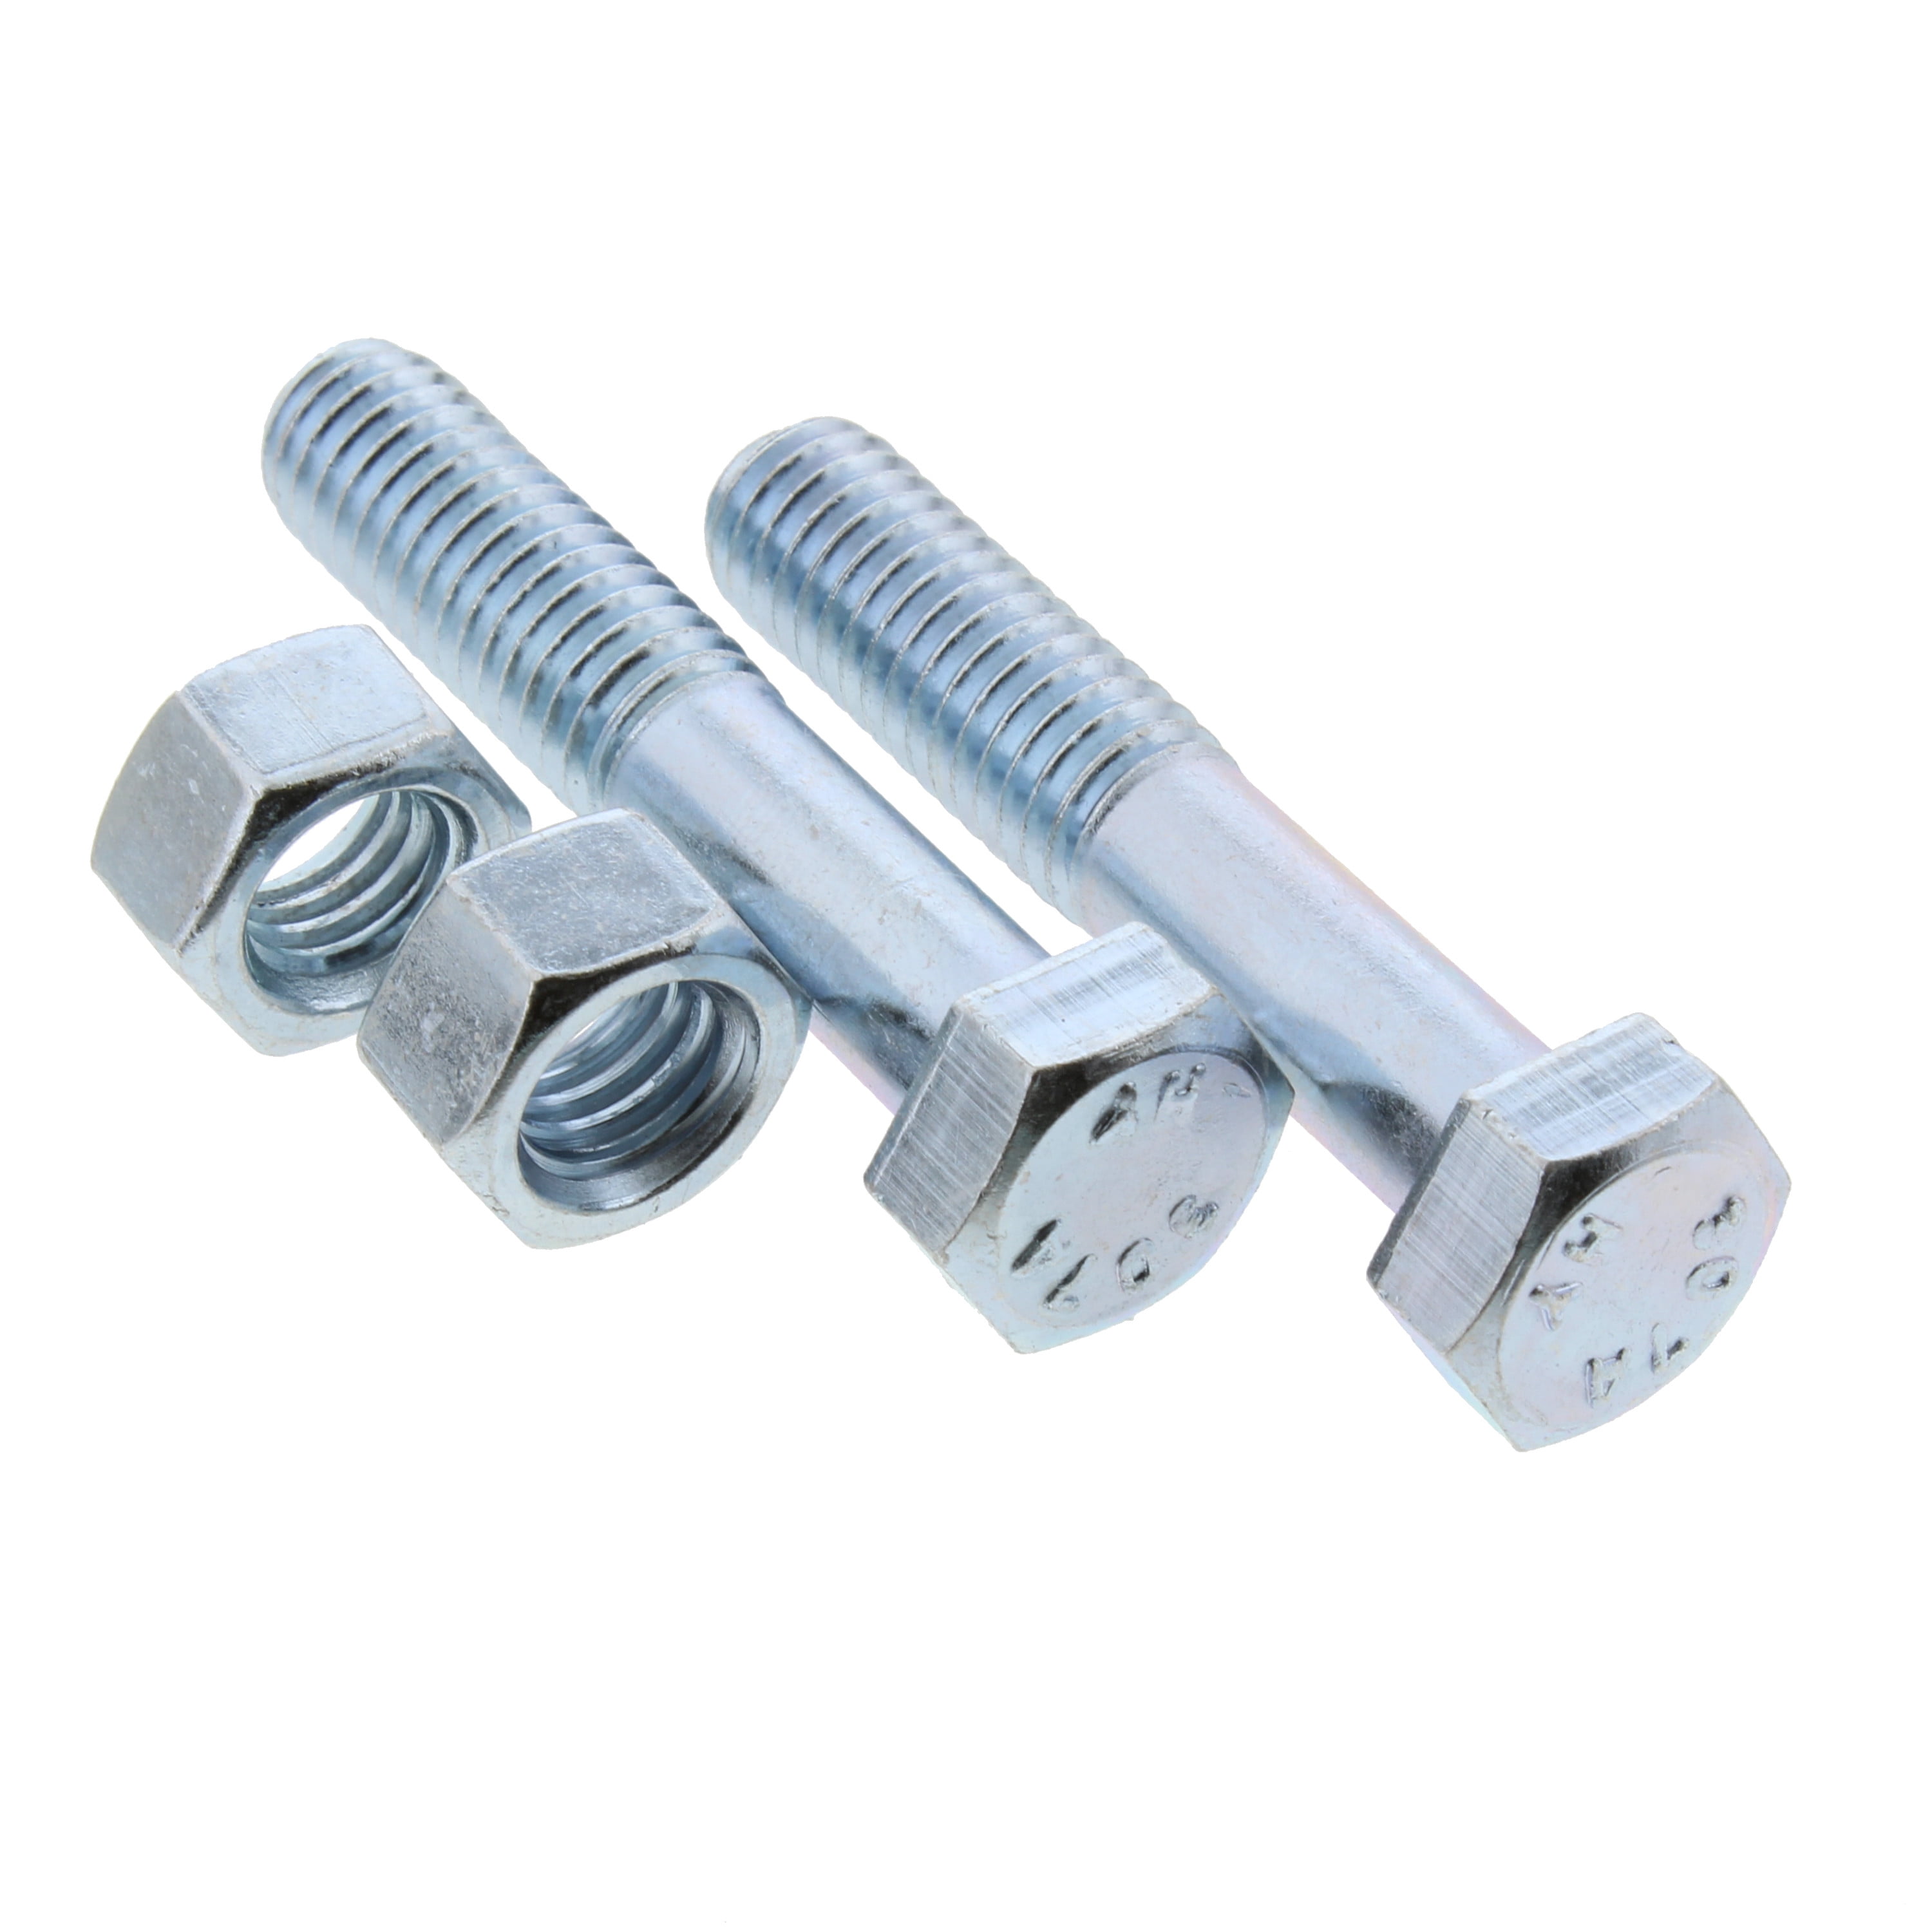 Good Holding Power in Different Materials 5/16-18x3/4 Stainless Steel Carriage Bolts Coarse Thread Round Head Screw Durable and Sturdy 50 